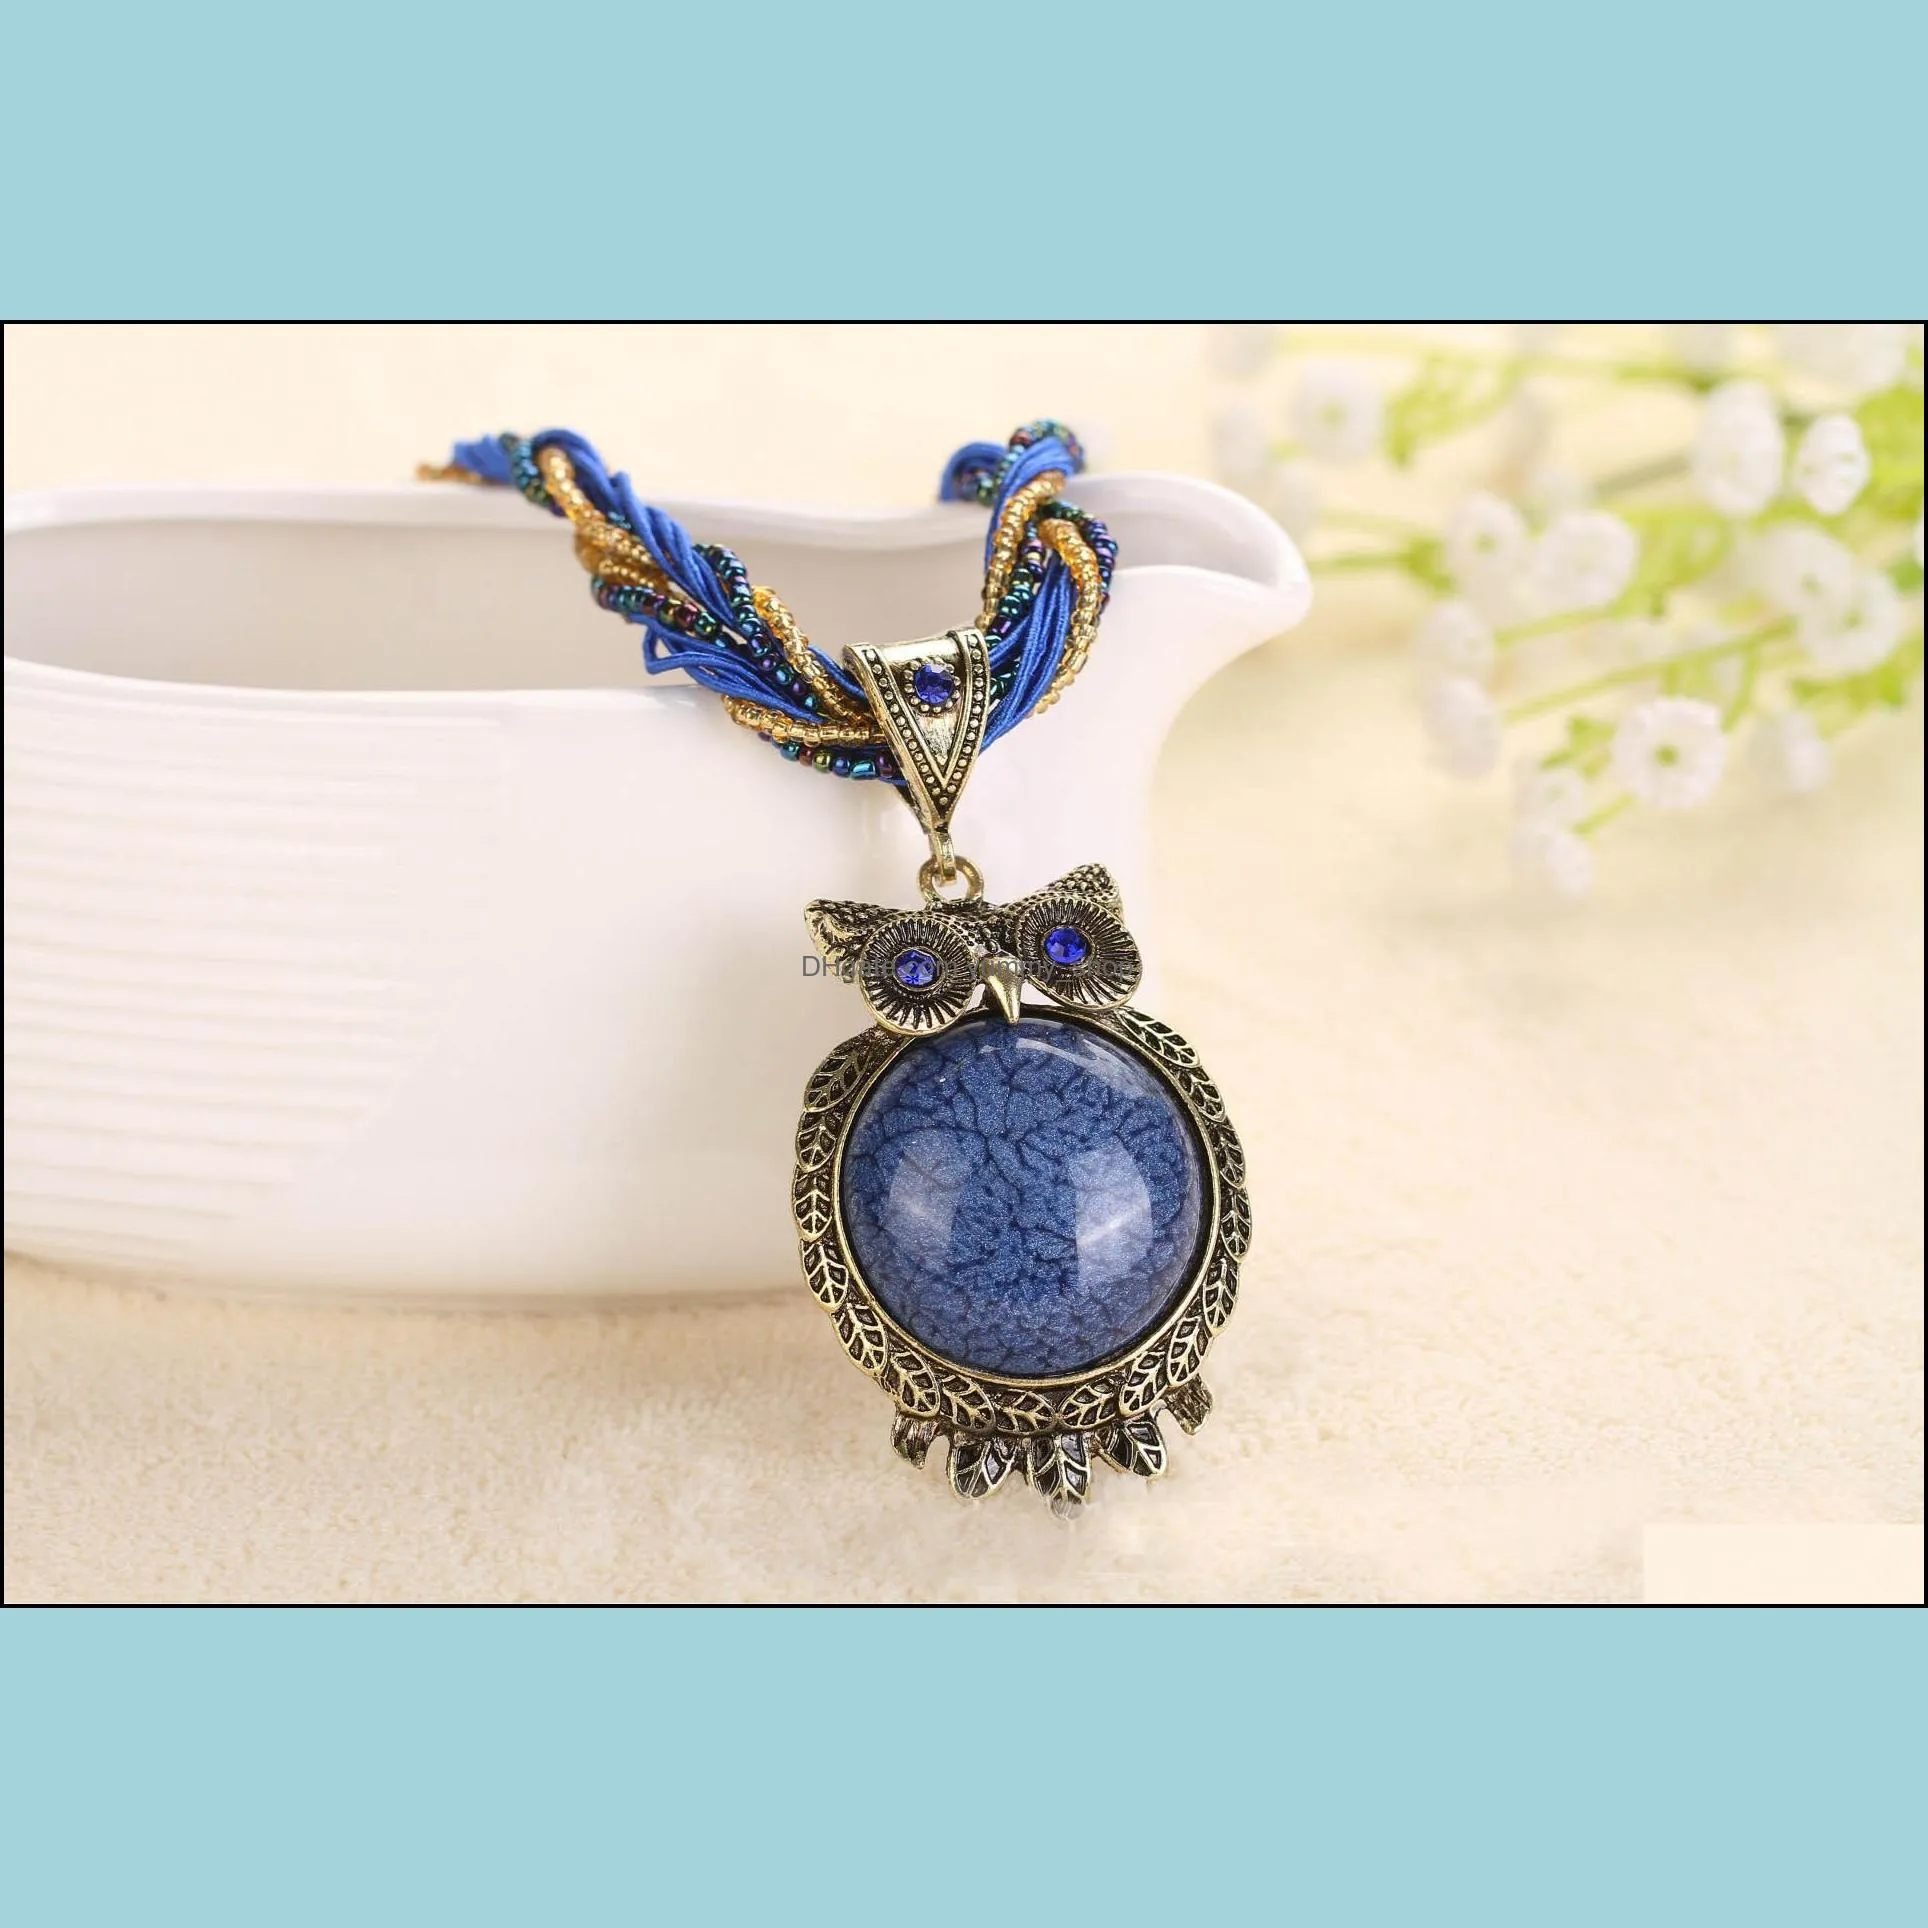 15 style bohemia owl gem copper crystal glass beads cord choker necklaces pendants necklace for women d786s